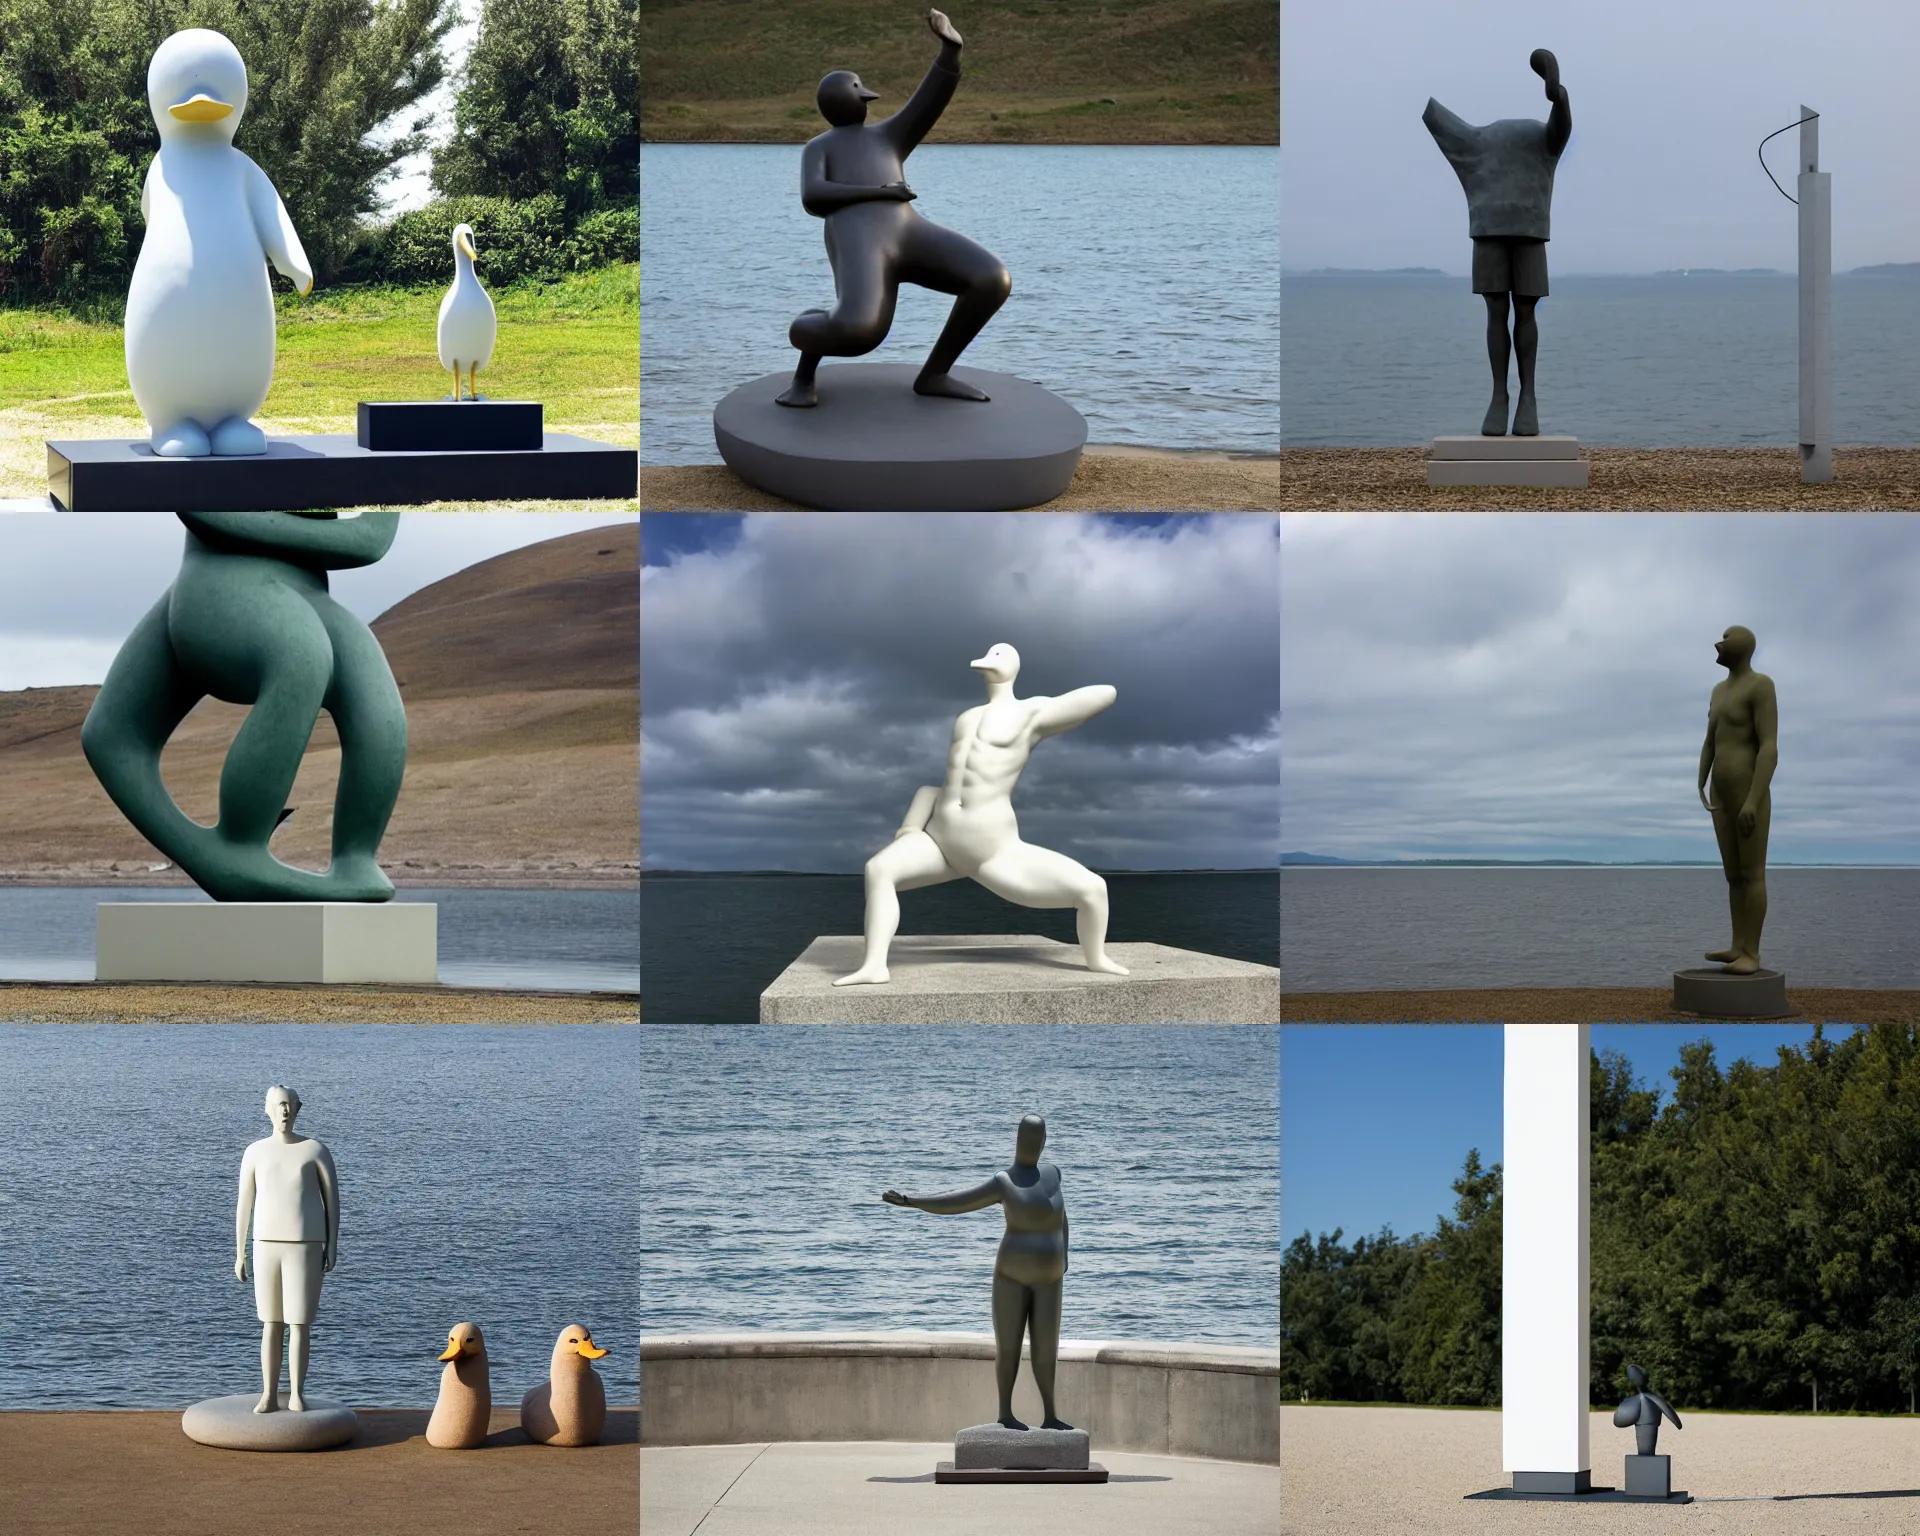 Prompt: duck duck goose giant statue standing pose by dieter rams at cloudy shore